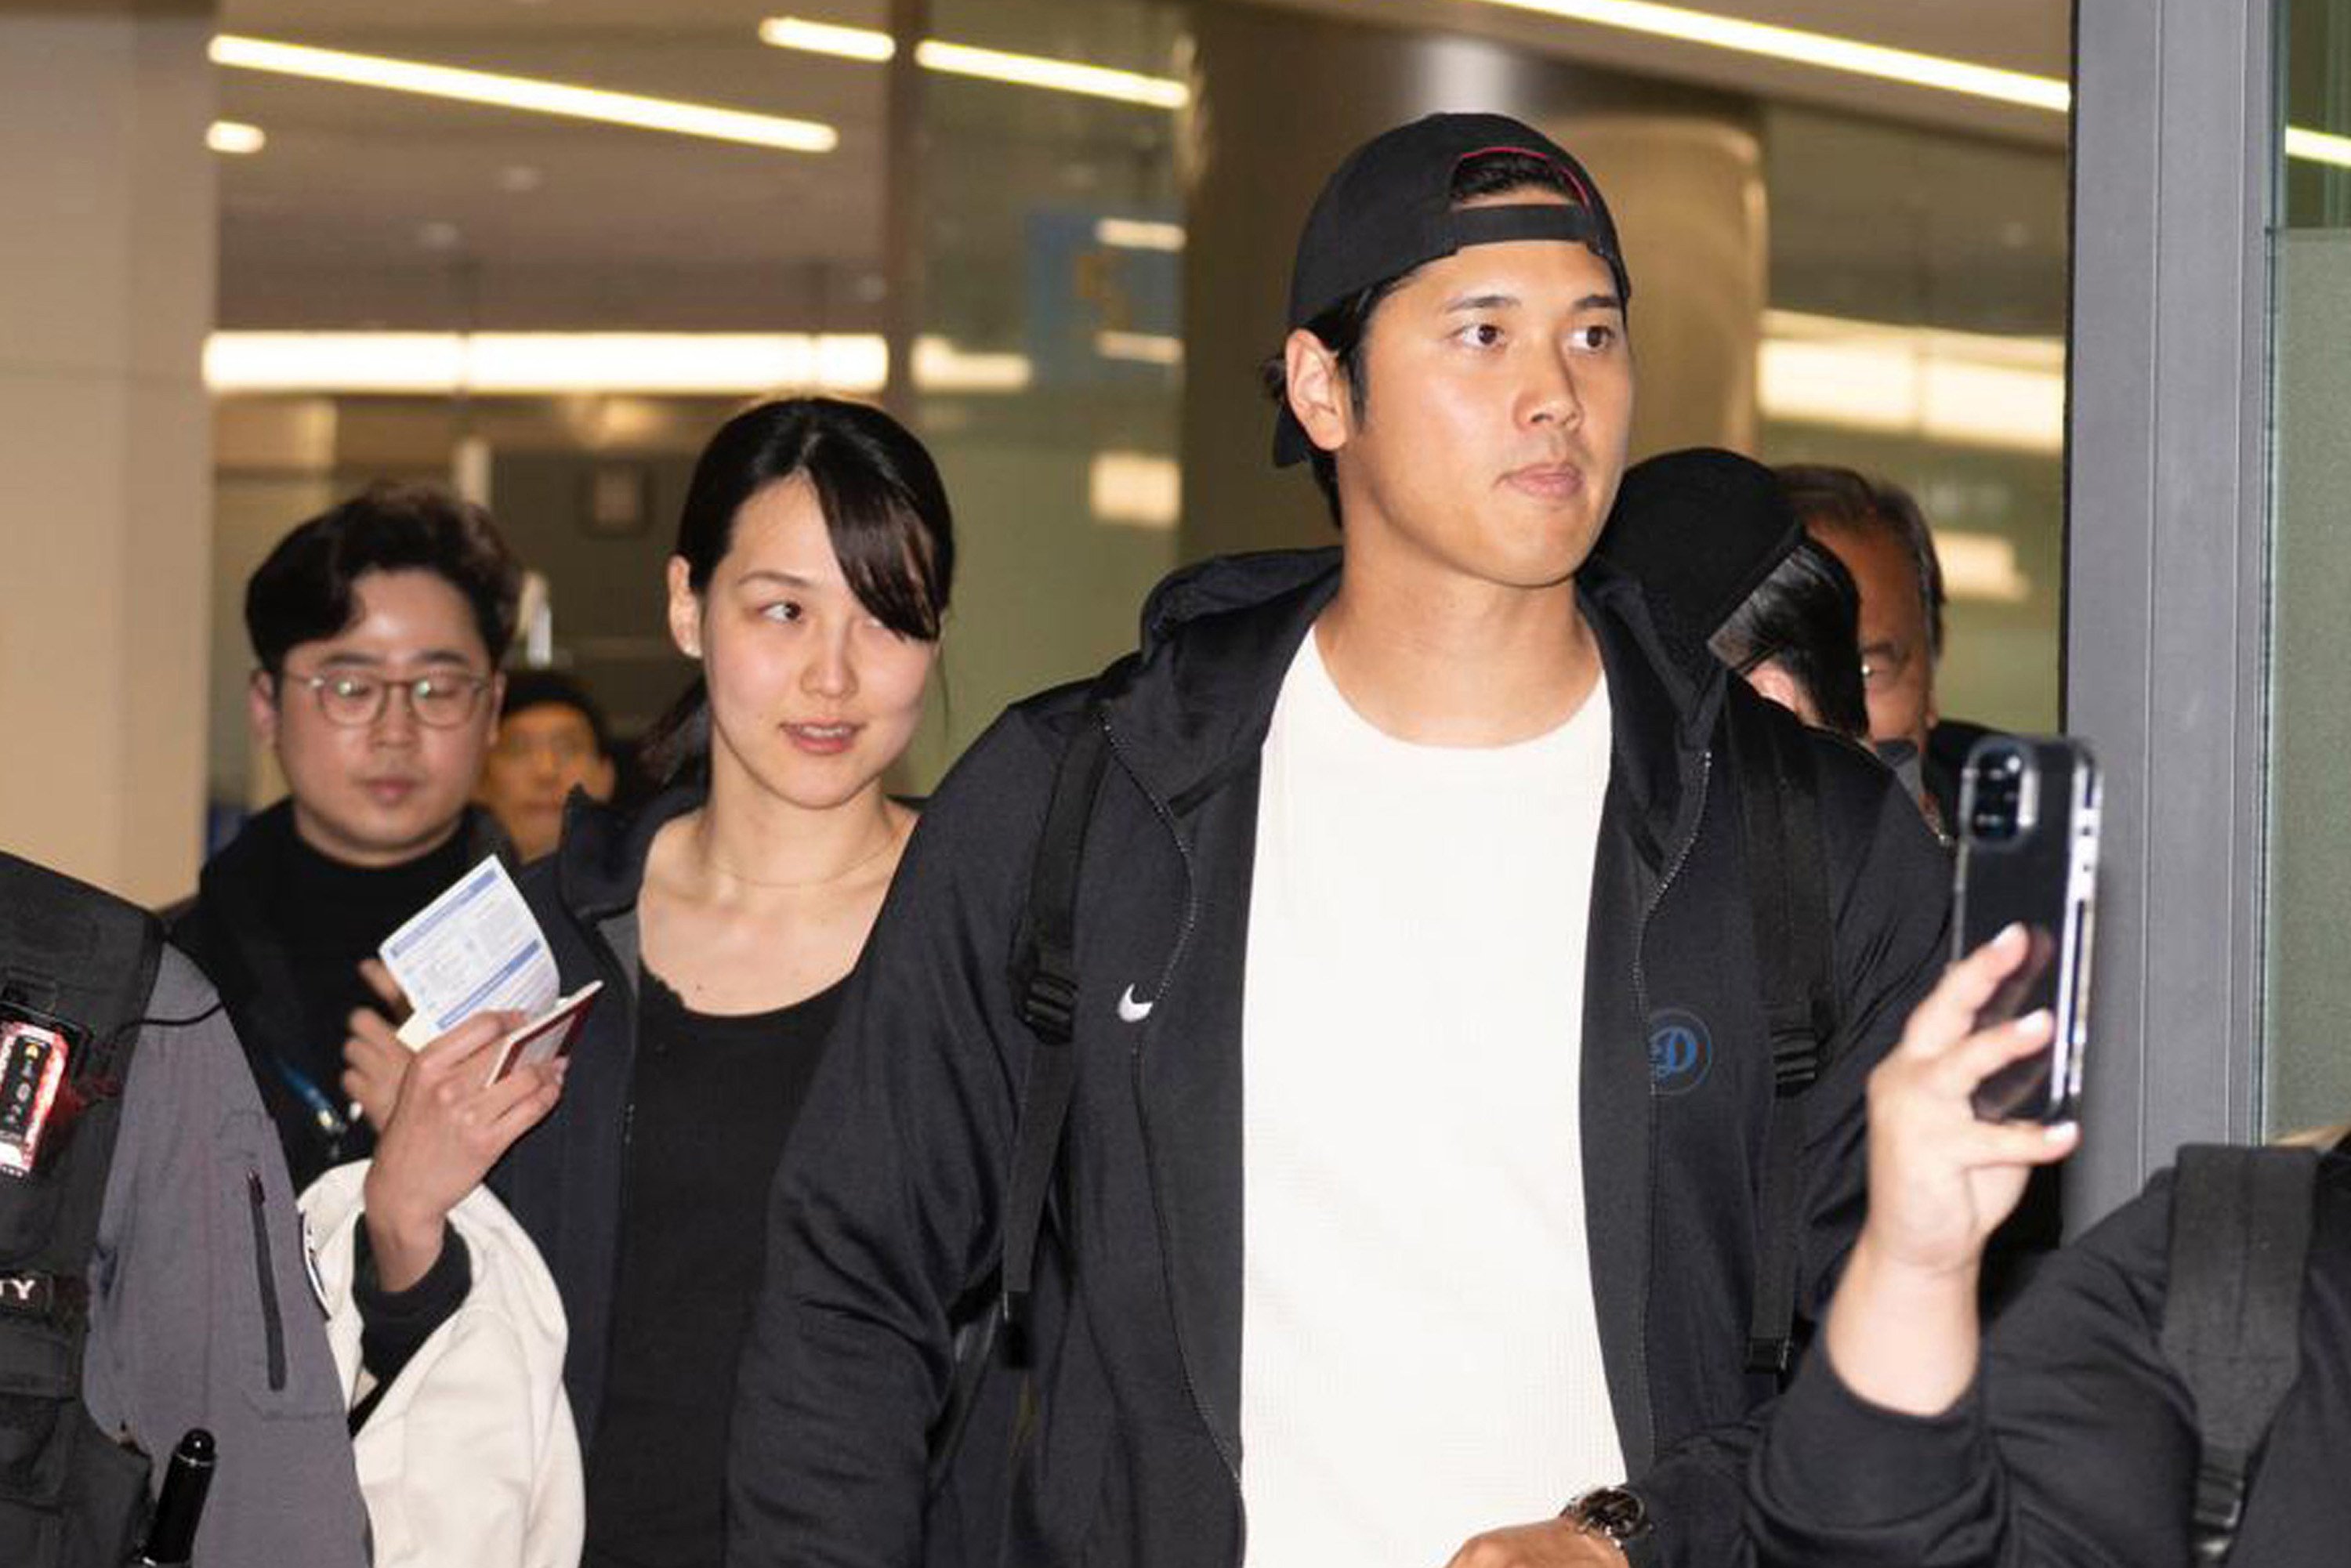 Shohei Ohtani and his wife Mamiko Tanaka arrive at Incheon airport in South Korea on March 15. Photo: Getty Images/TNS